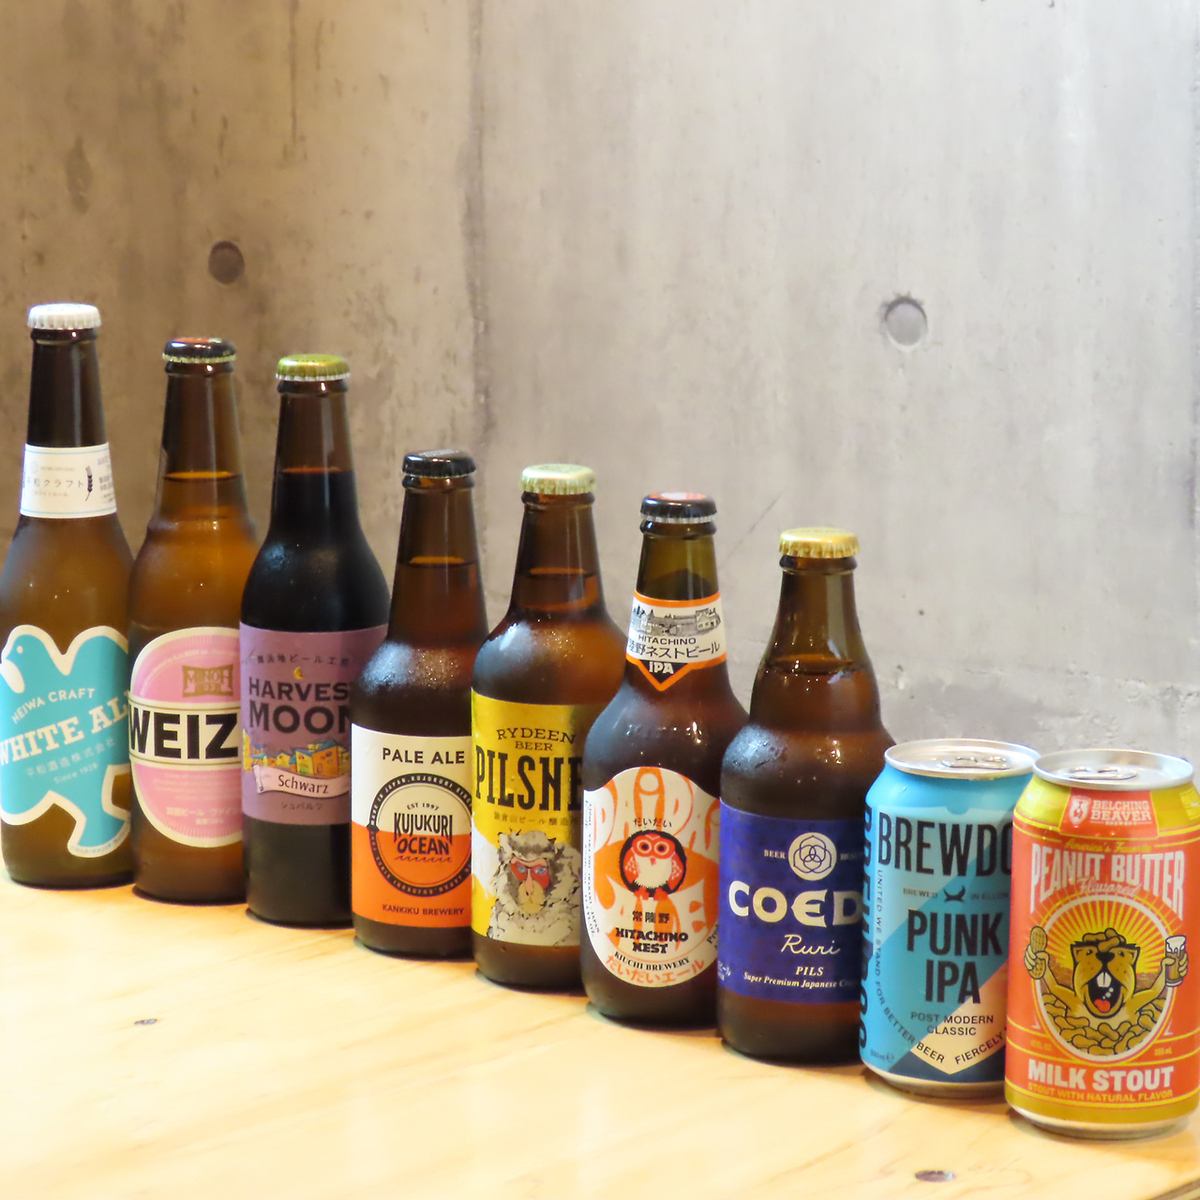 We have a wide variety of craft beers available